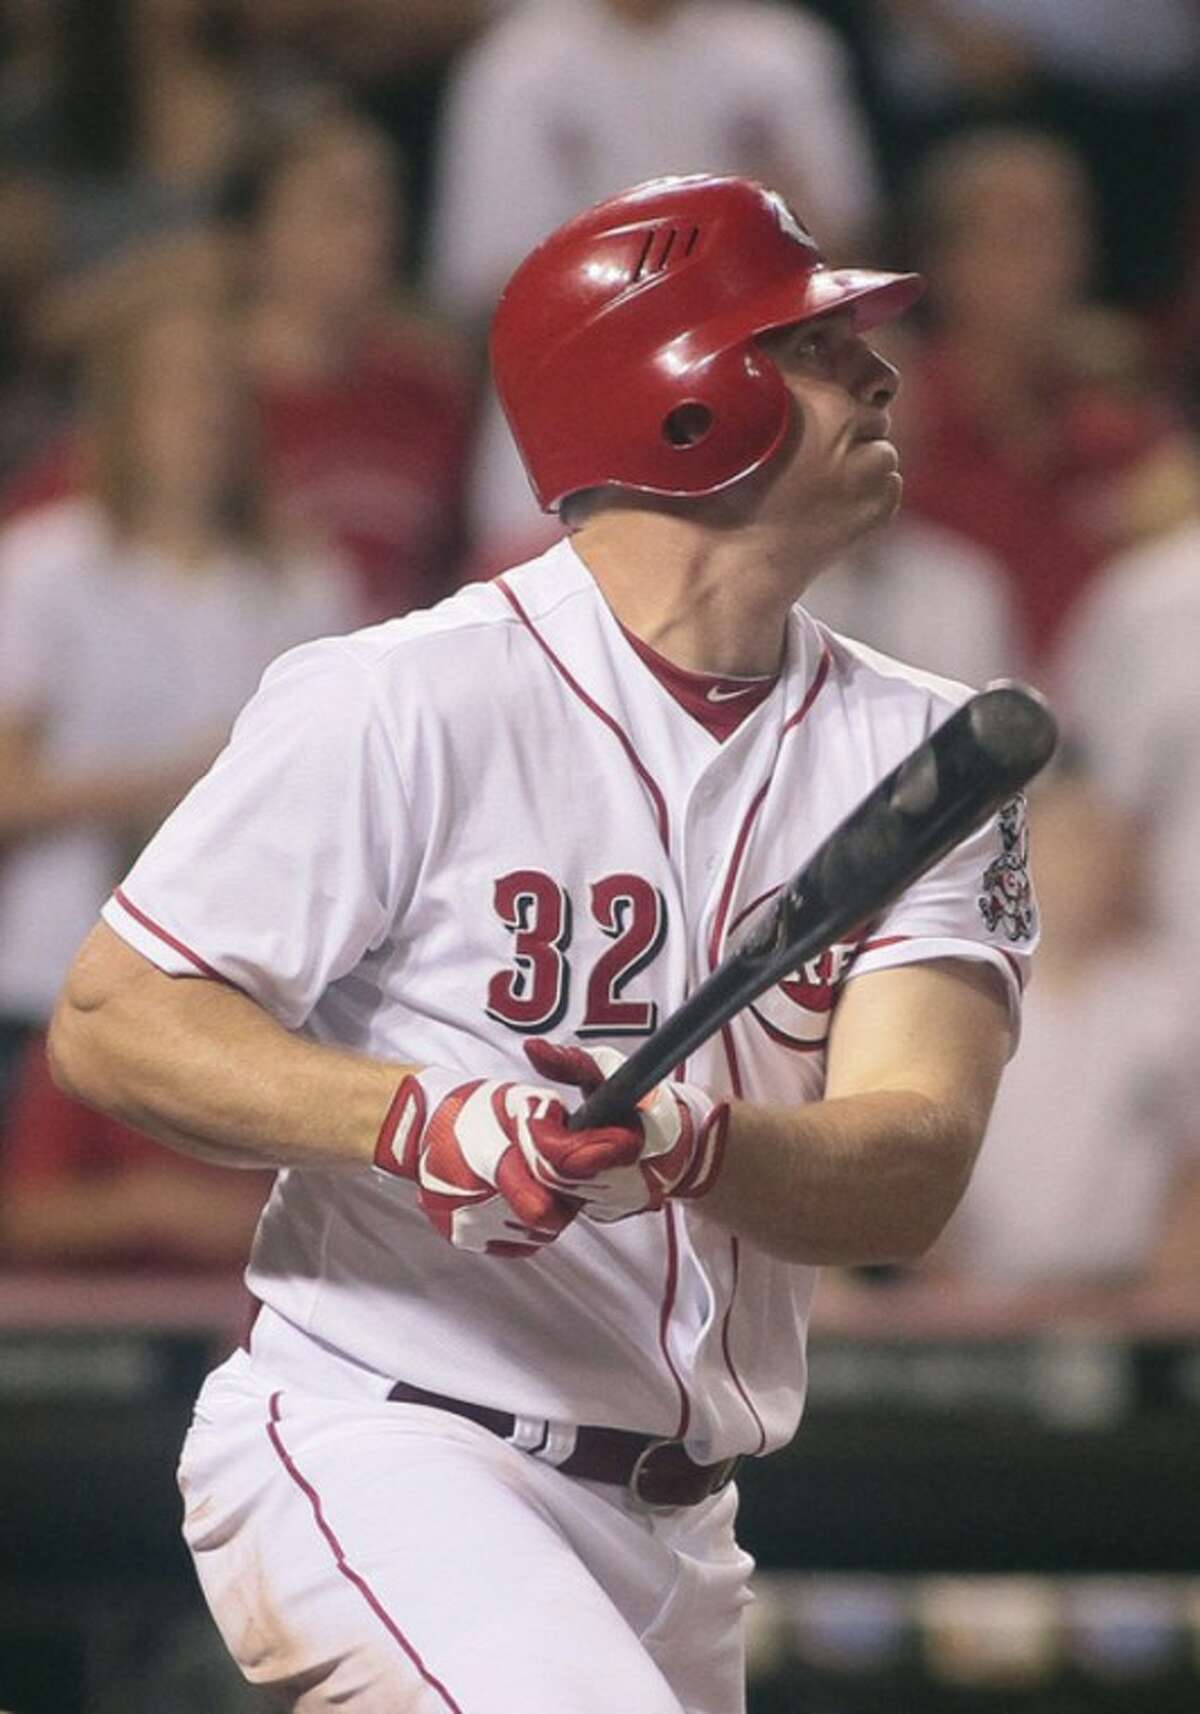 Cincinnati Reds' Jay Bruce watches his three-run home run off of New York Mets reliever Josh Edgin scoring Brandon Phillips and Ryan Ludwig in the ninth inning of a baseball game, Tuesday, Aug. 14, 2012, in Cincinnati. The Red won 3-0. (AP Photo/Tony Tribble)